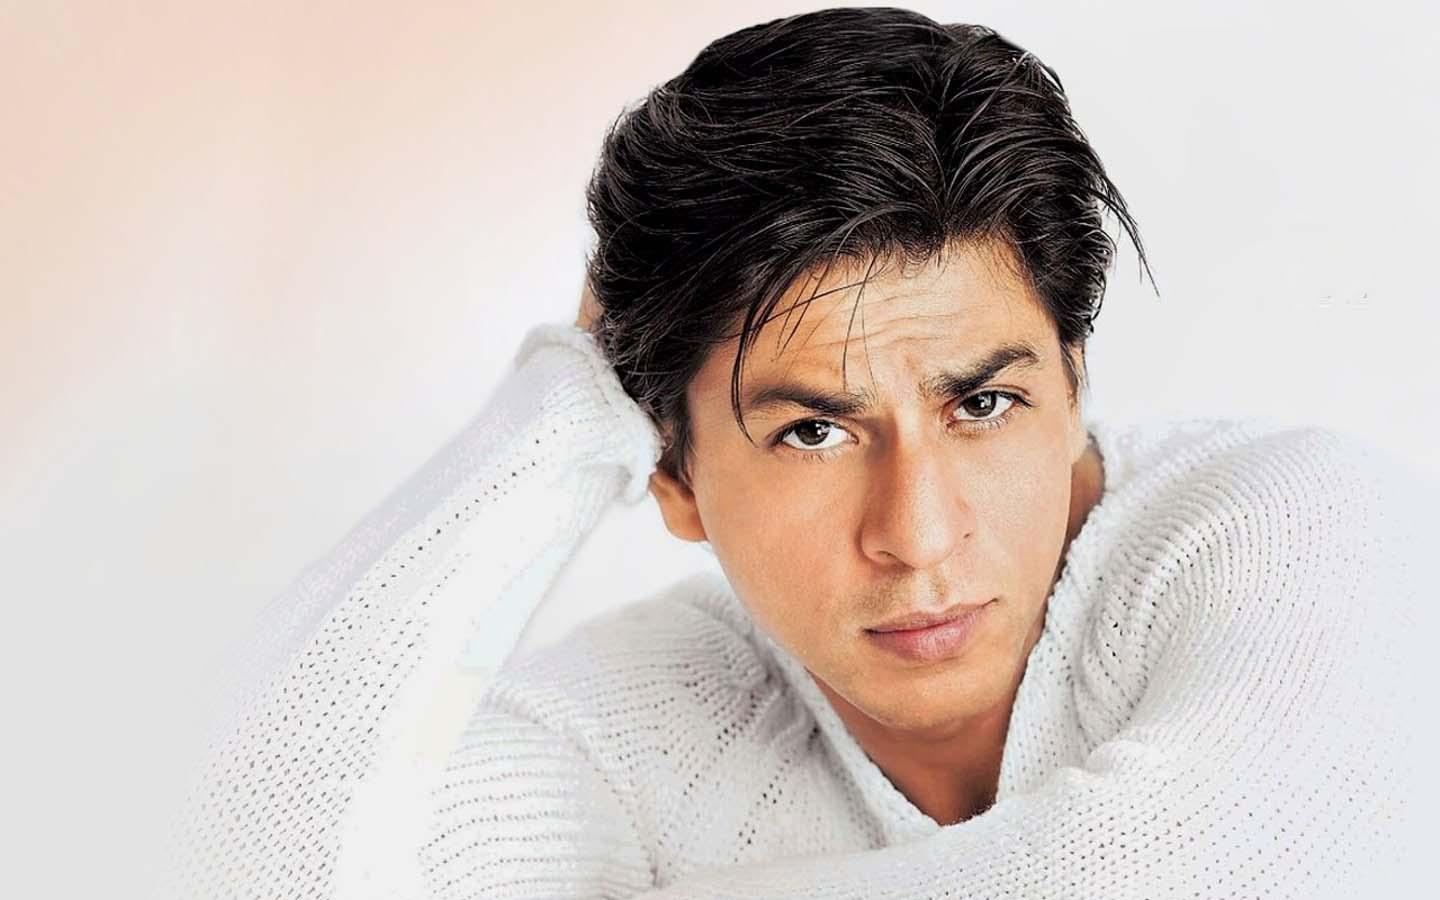 Shahrukh Khan decent look Wall Poster Print on Art Paper 13x19 Inches Paper  Print - Personalities posters in India - Buy art, film, design, movie,  music, nature and educational paintings/wallpapers at Flipkart.com